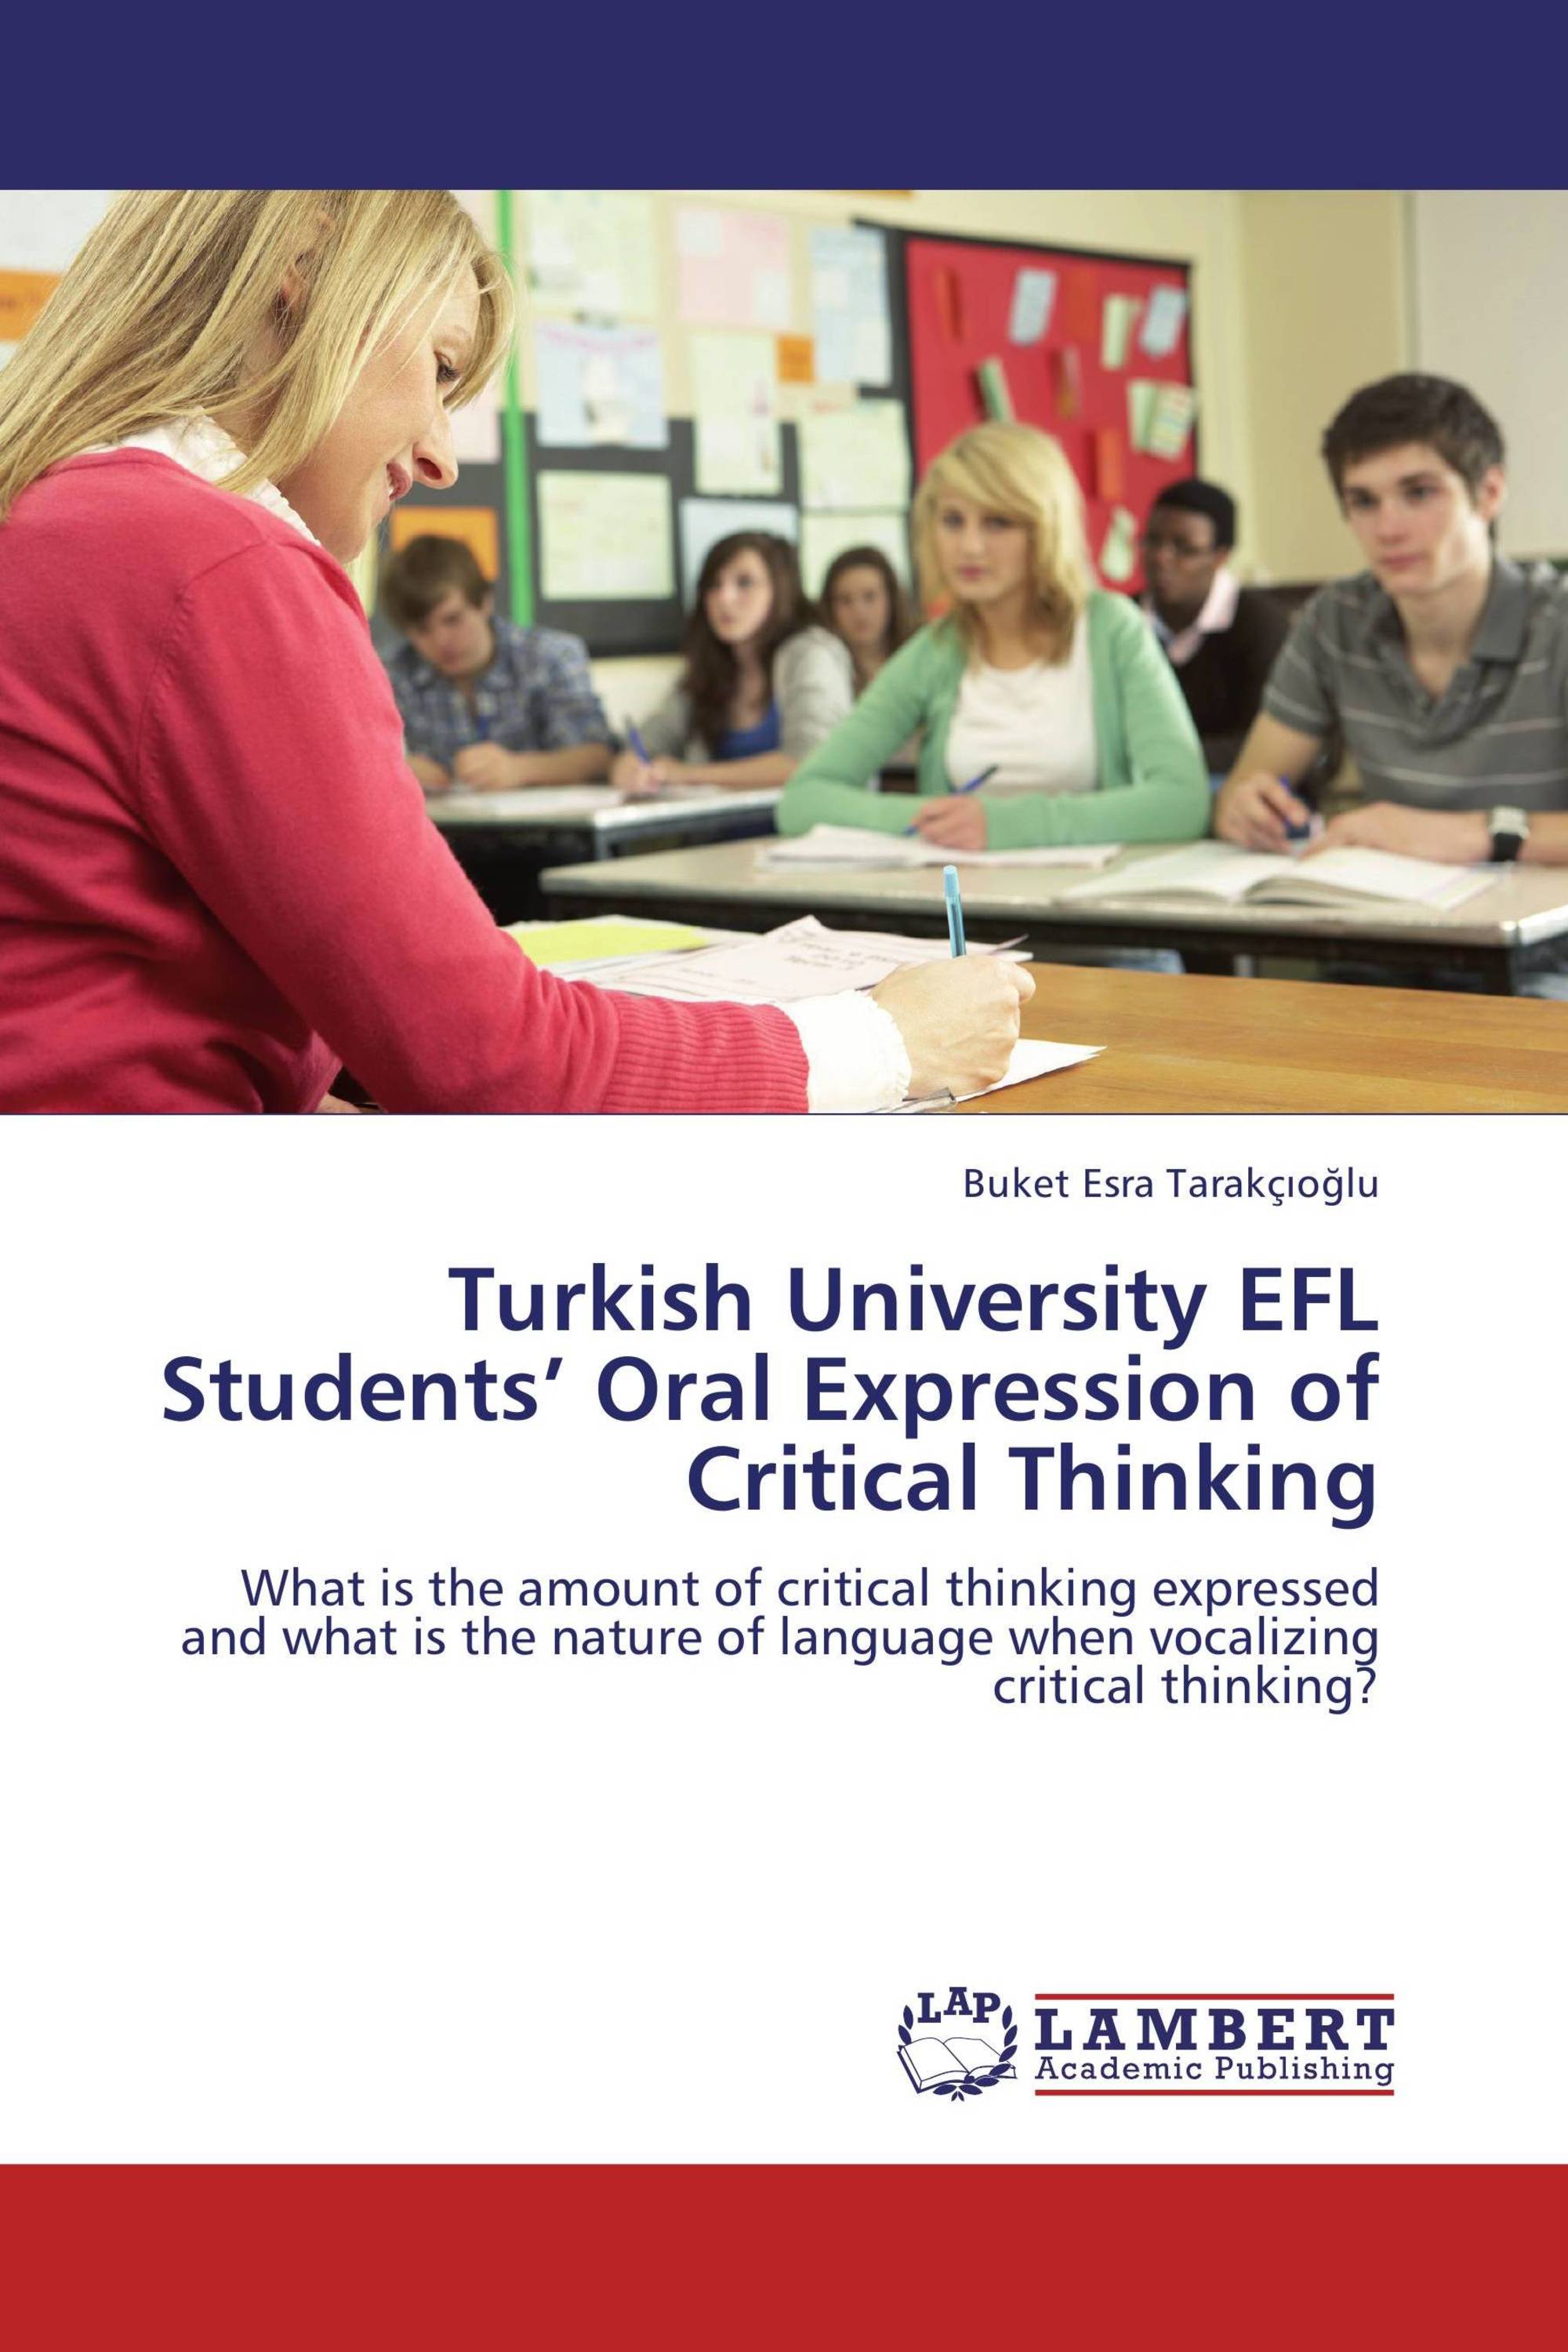 critical thinking meaning in turkish